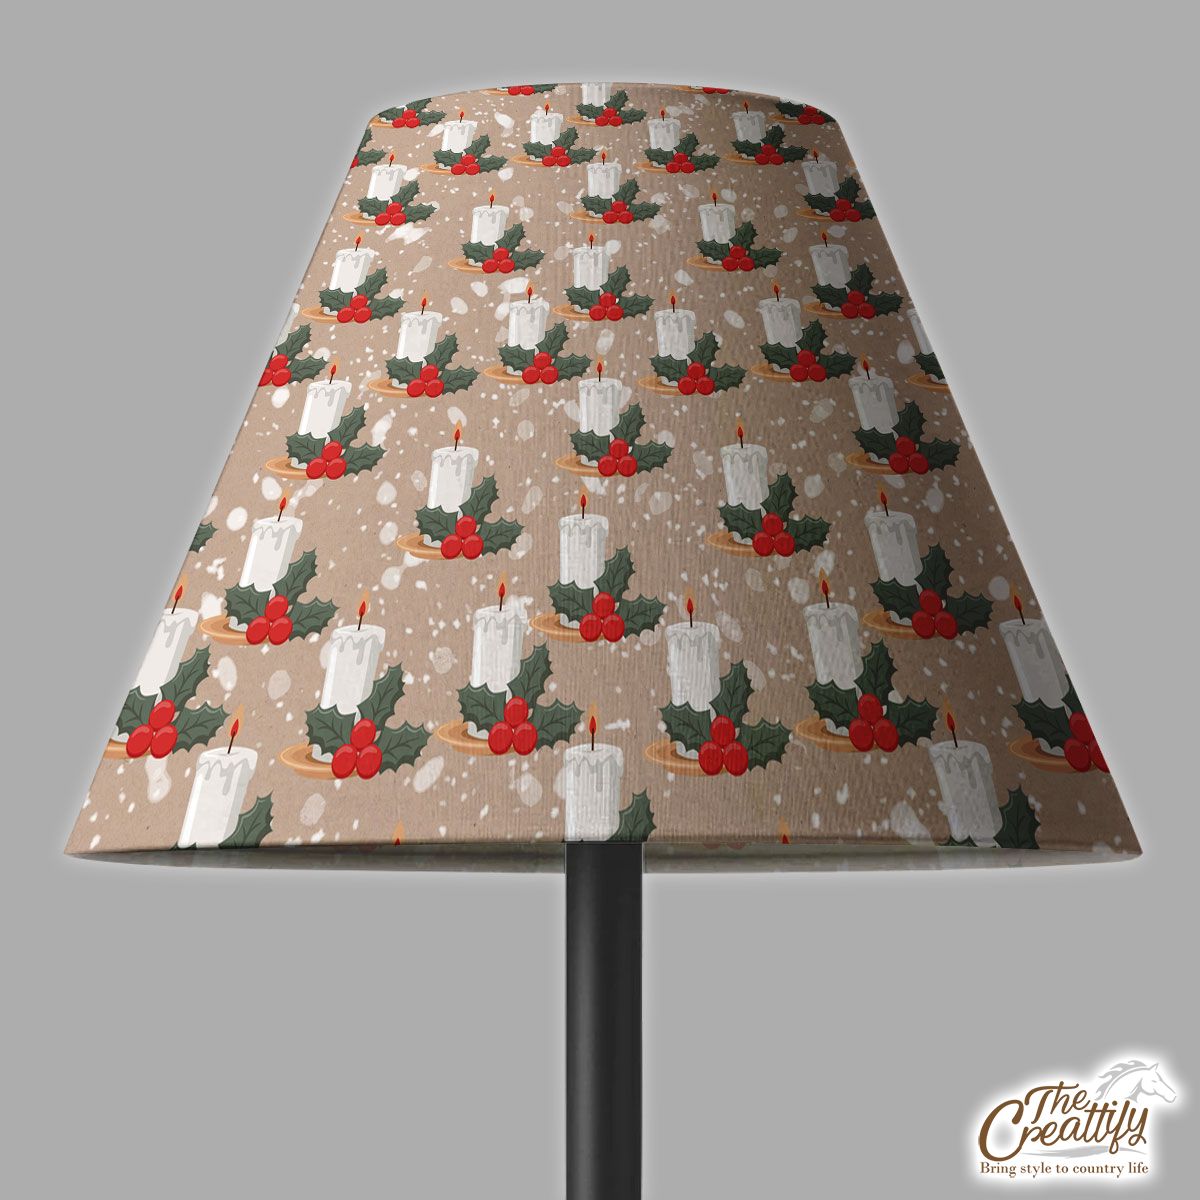 Christmas Candle With Holly Leaf On Snowflake Background Lamp Cover